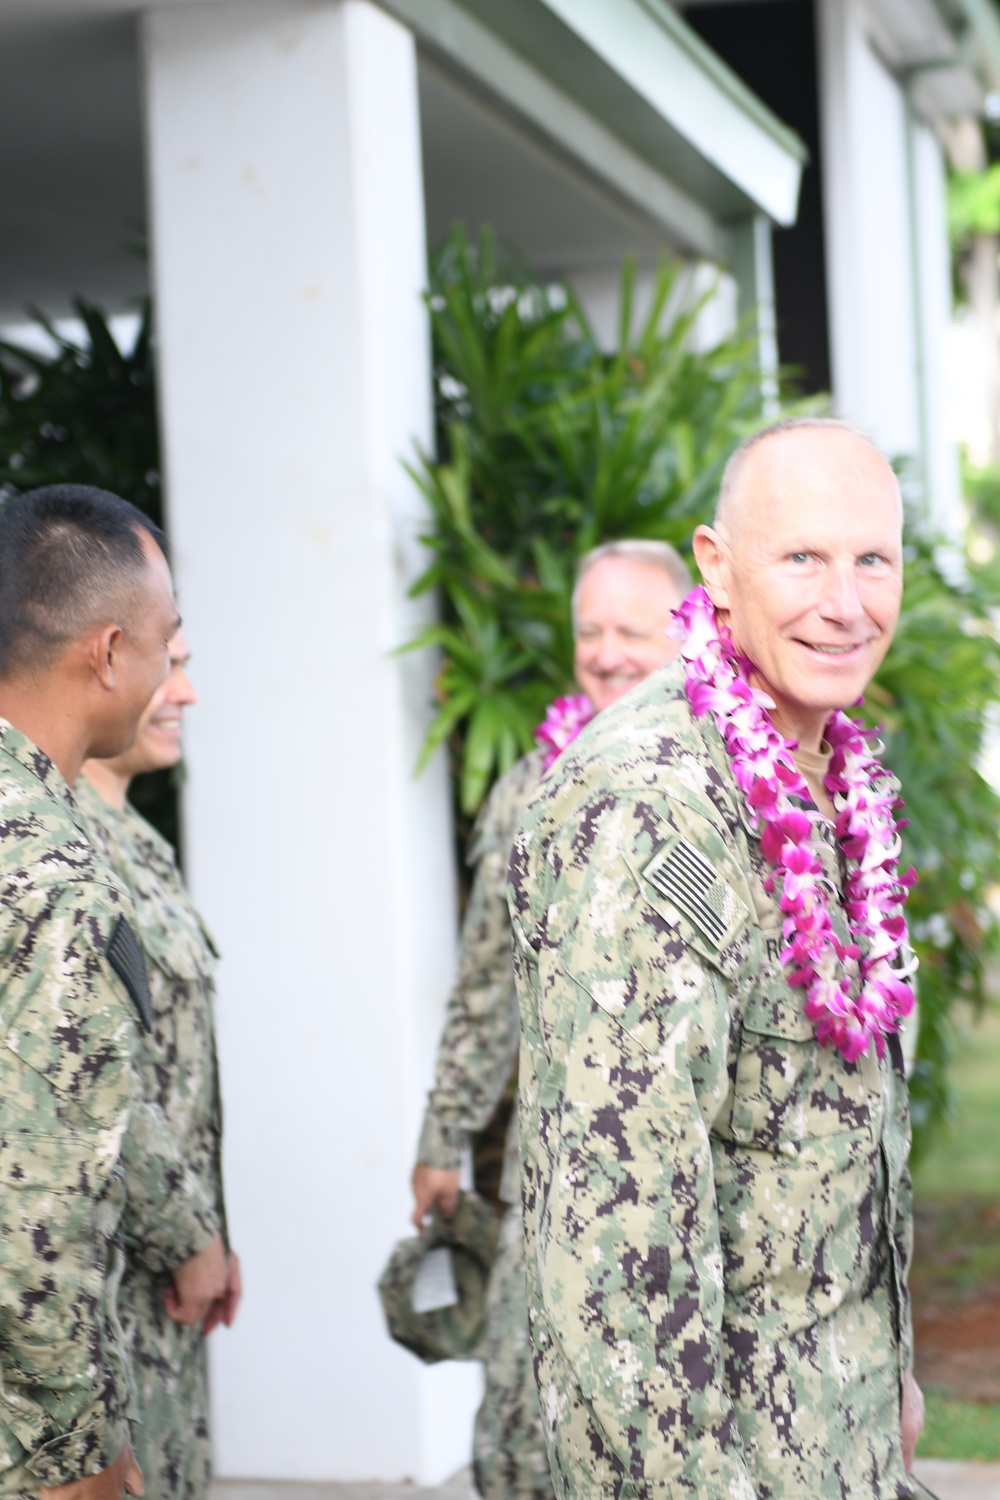 Acting Navy Surgeon General, Rear Adm. Darin K. Via, and Force Master Chief Michael J. Roberts, director of the Hospital Corps NMRTC